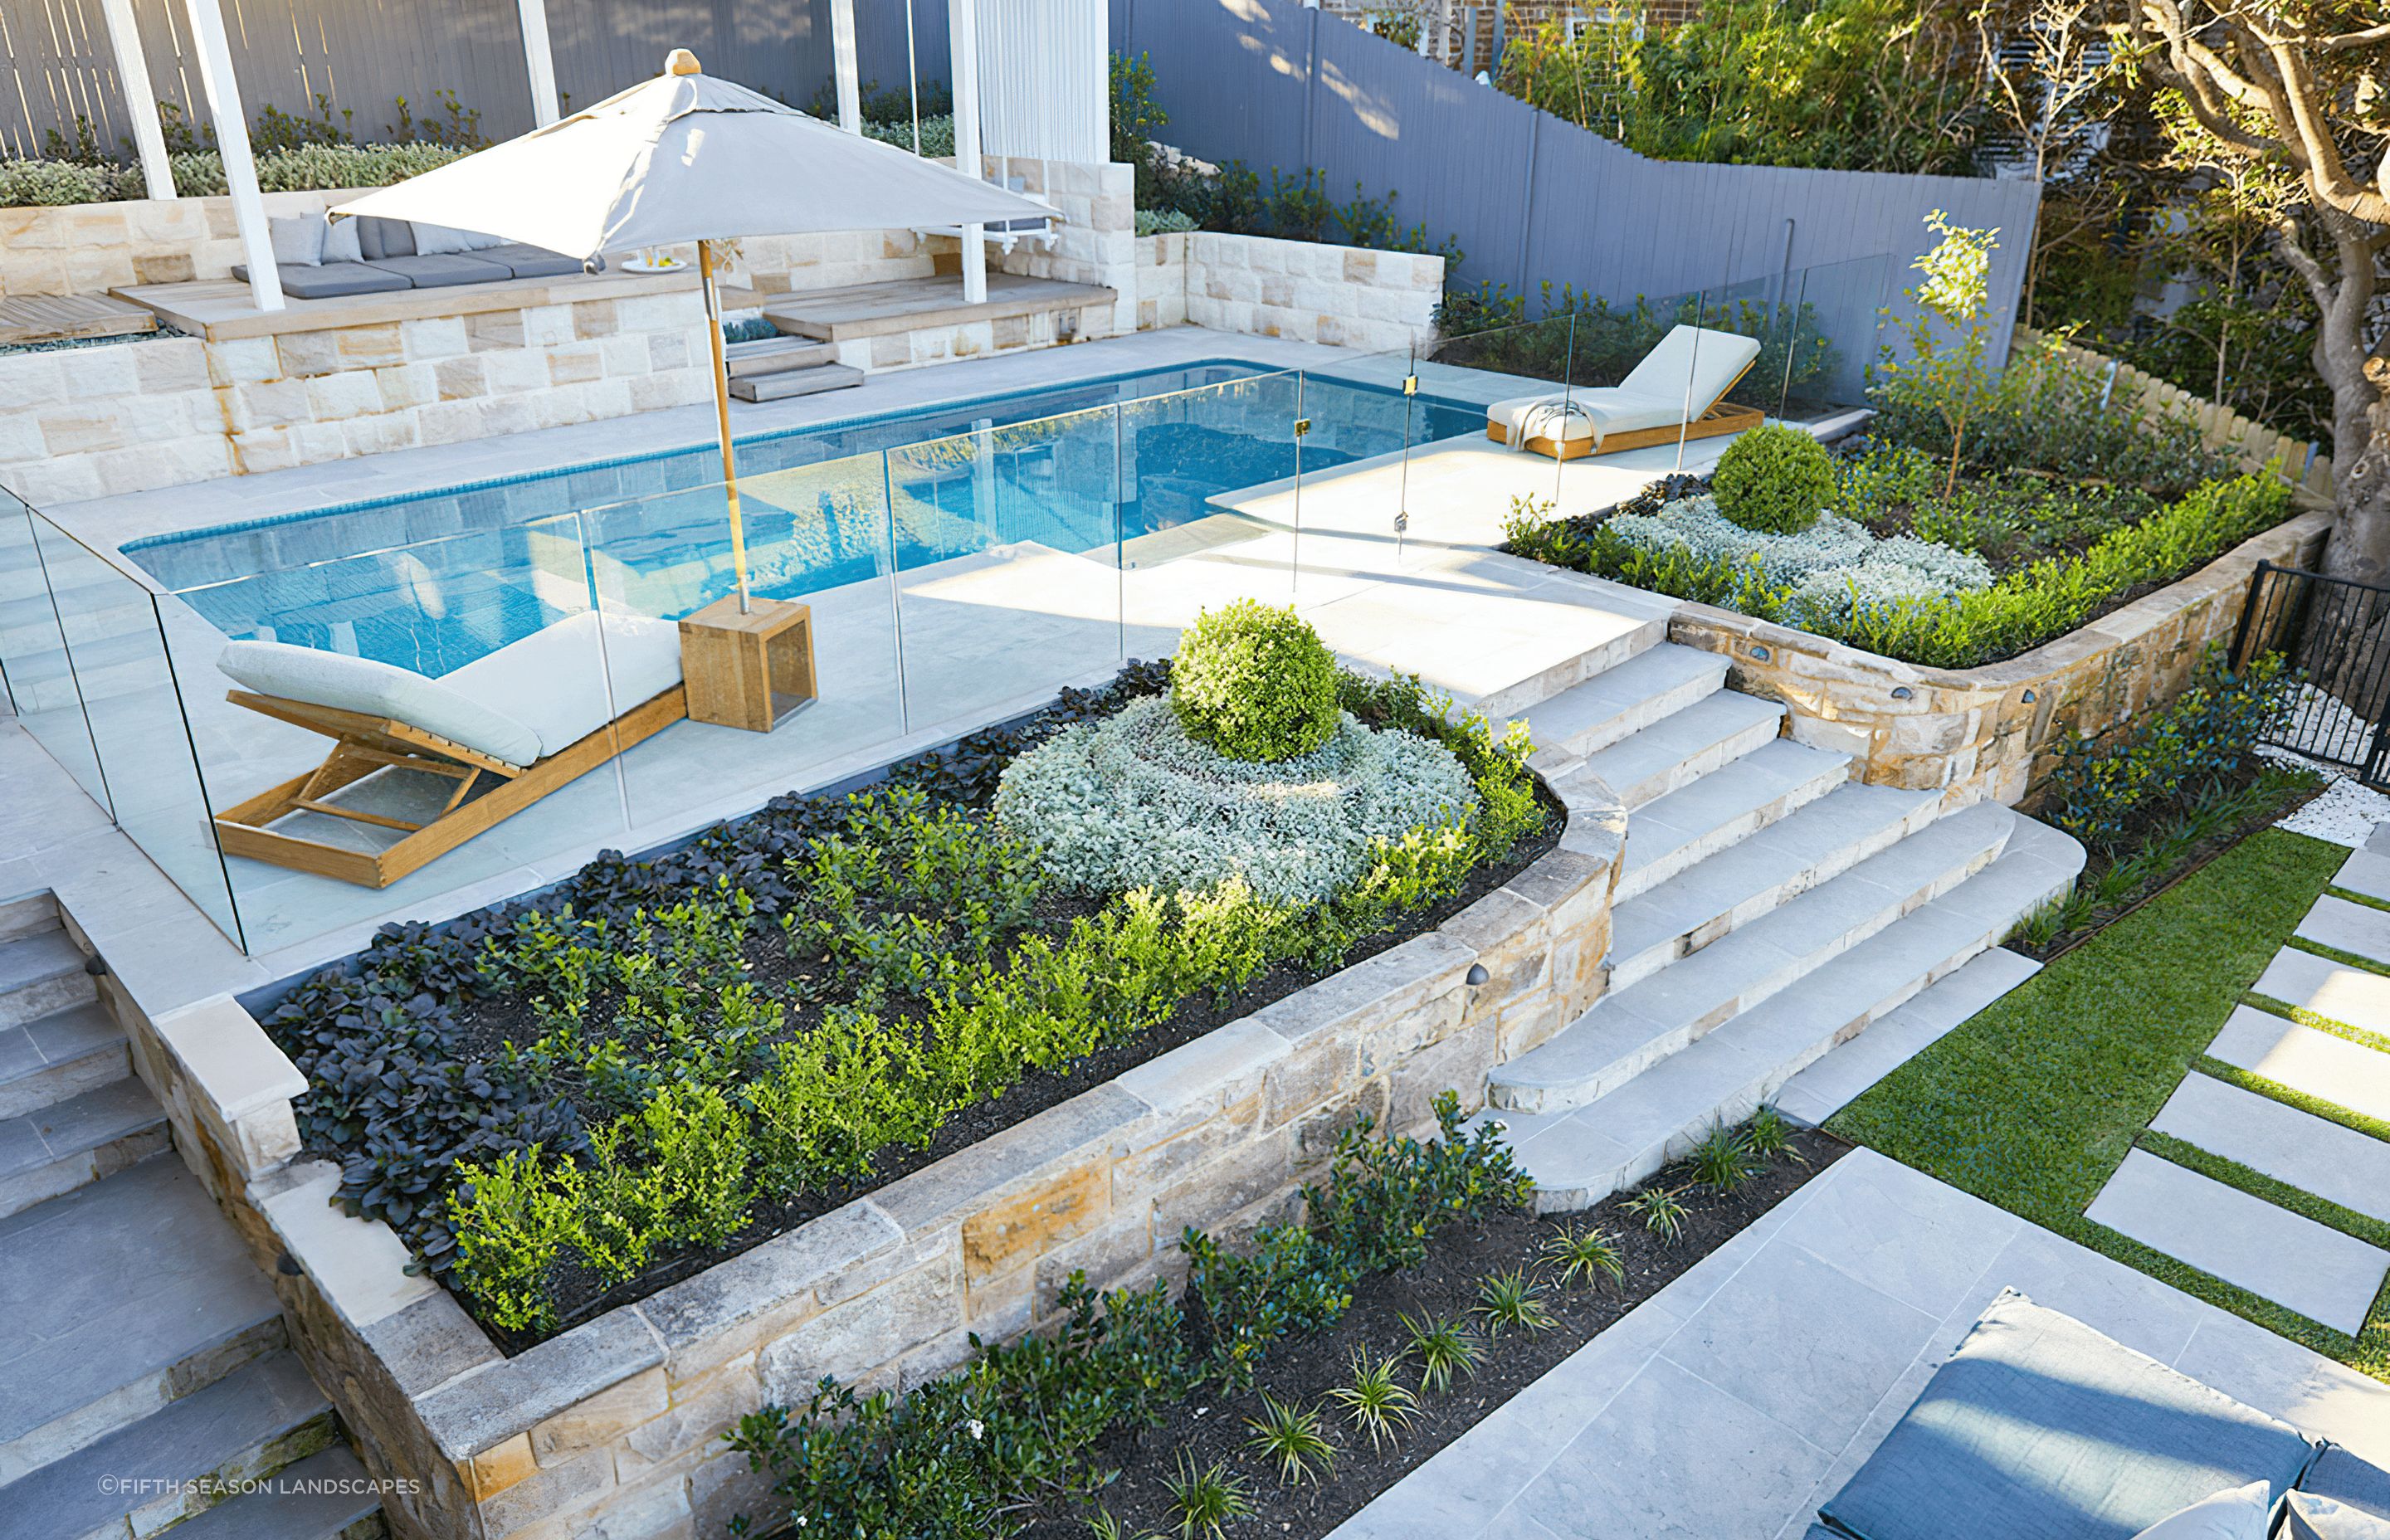 These flower beds are well positioned to draw the eye to the pool, while capturing natural light. Featured project: Longueville Project 1 - Fifth Season Landscapes